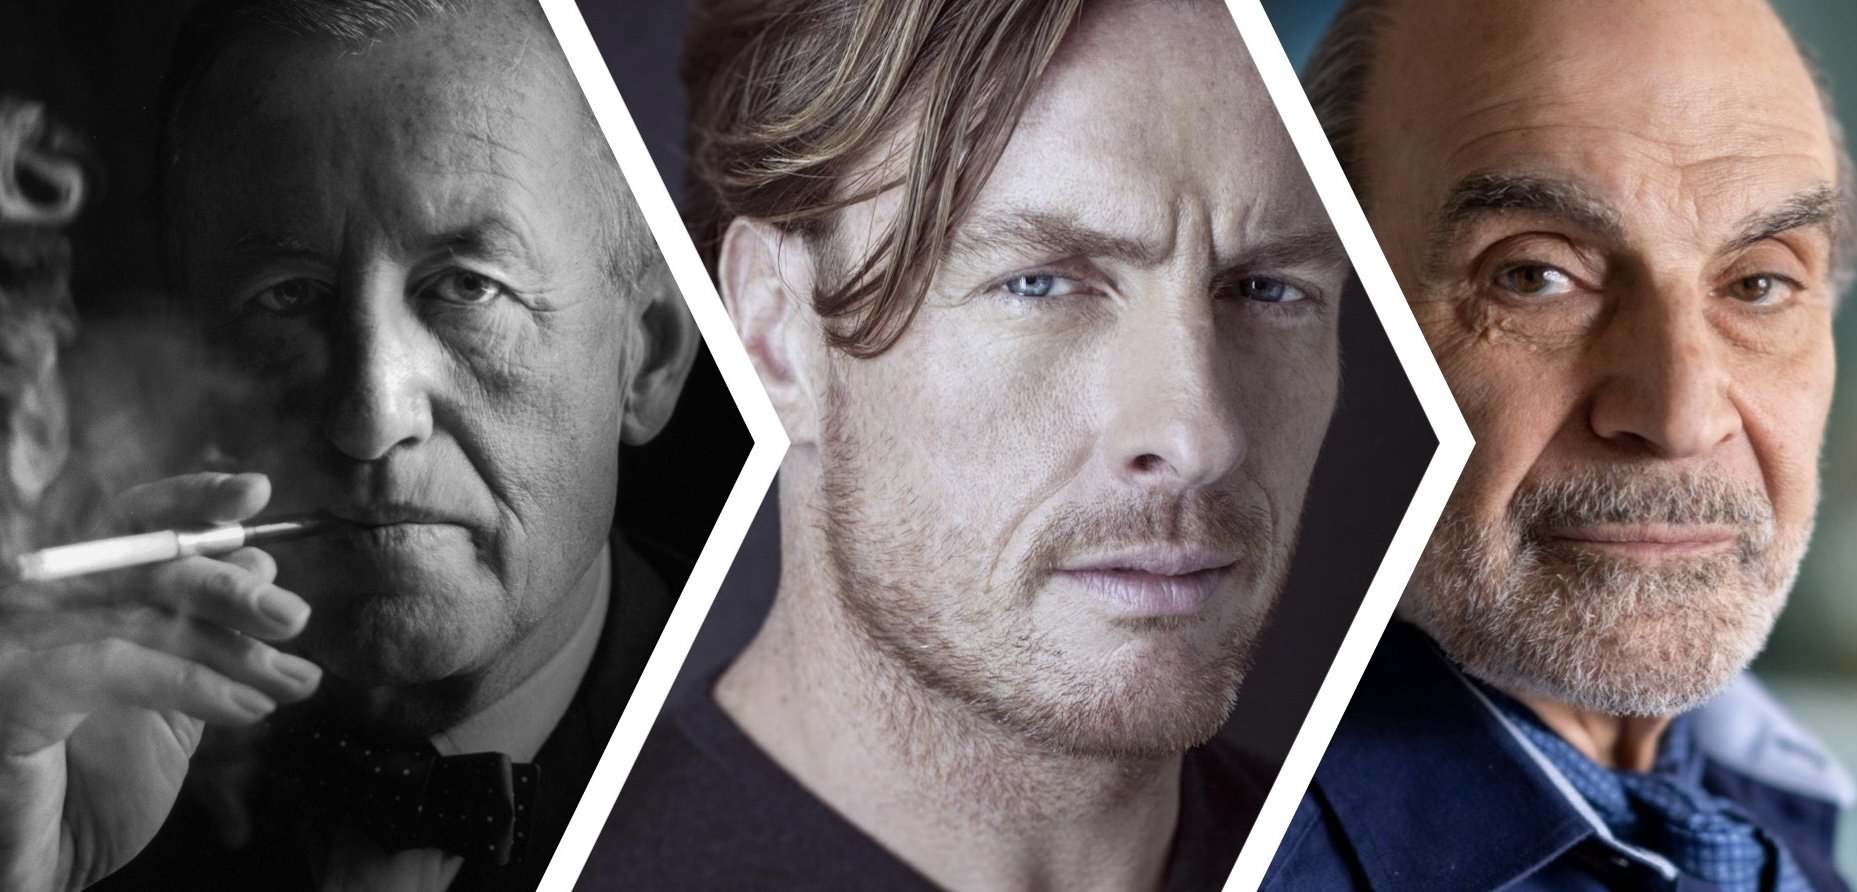 8 Questions WithToby Stephens